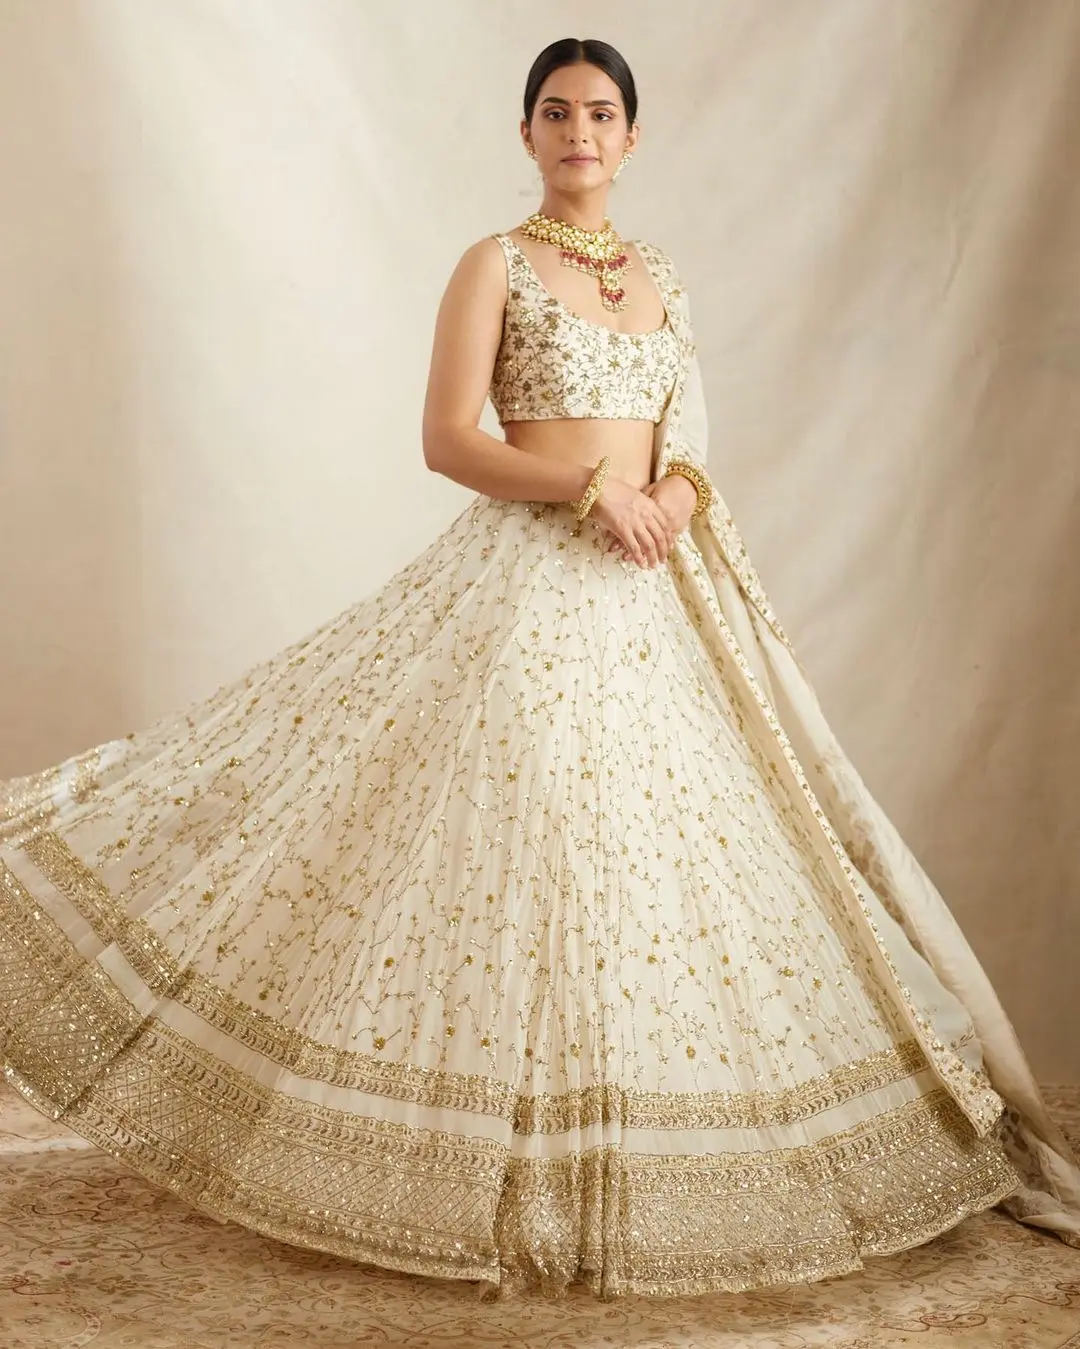 FULPARI best selling new designer Georgette lehenga choli with bloluse and dupatta for women indian wedding latest collection